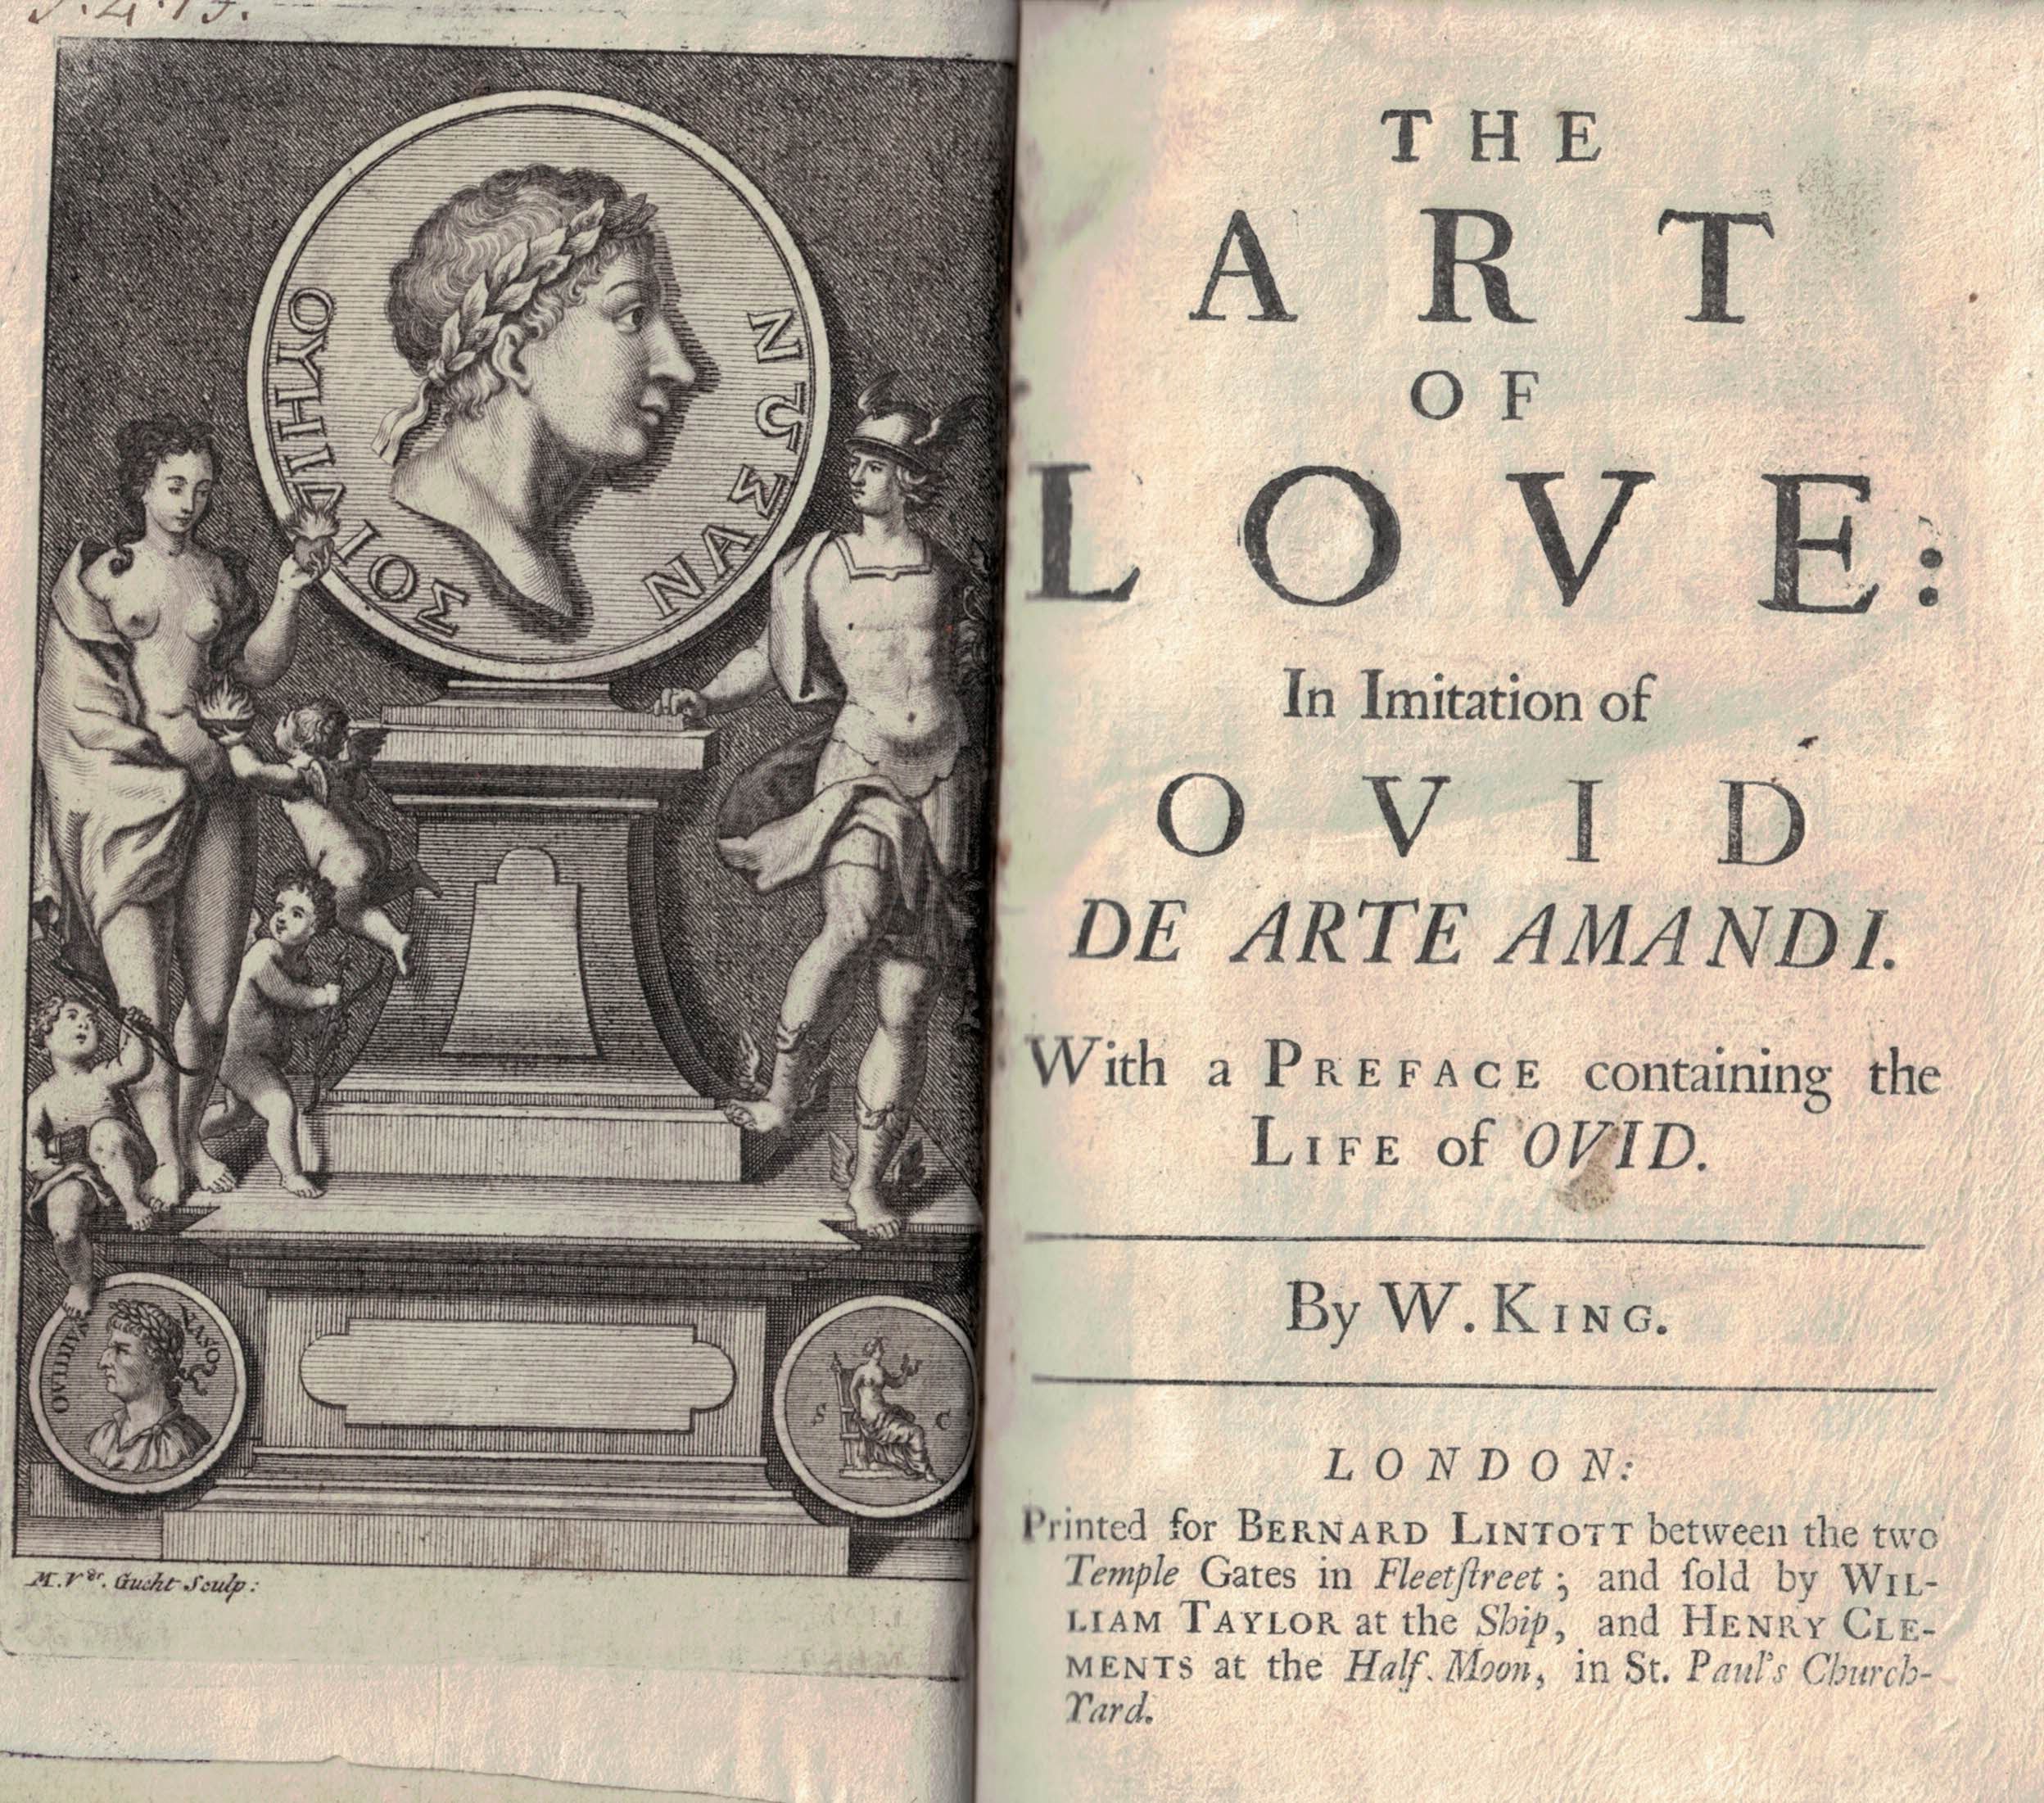 The Art of Love: In Imitation of Ovid de Arte Amandi. With a Preface Containing the Life of Ovid.